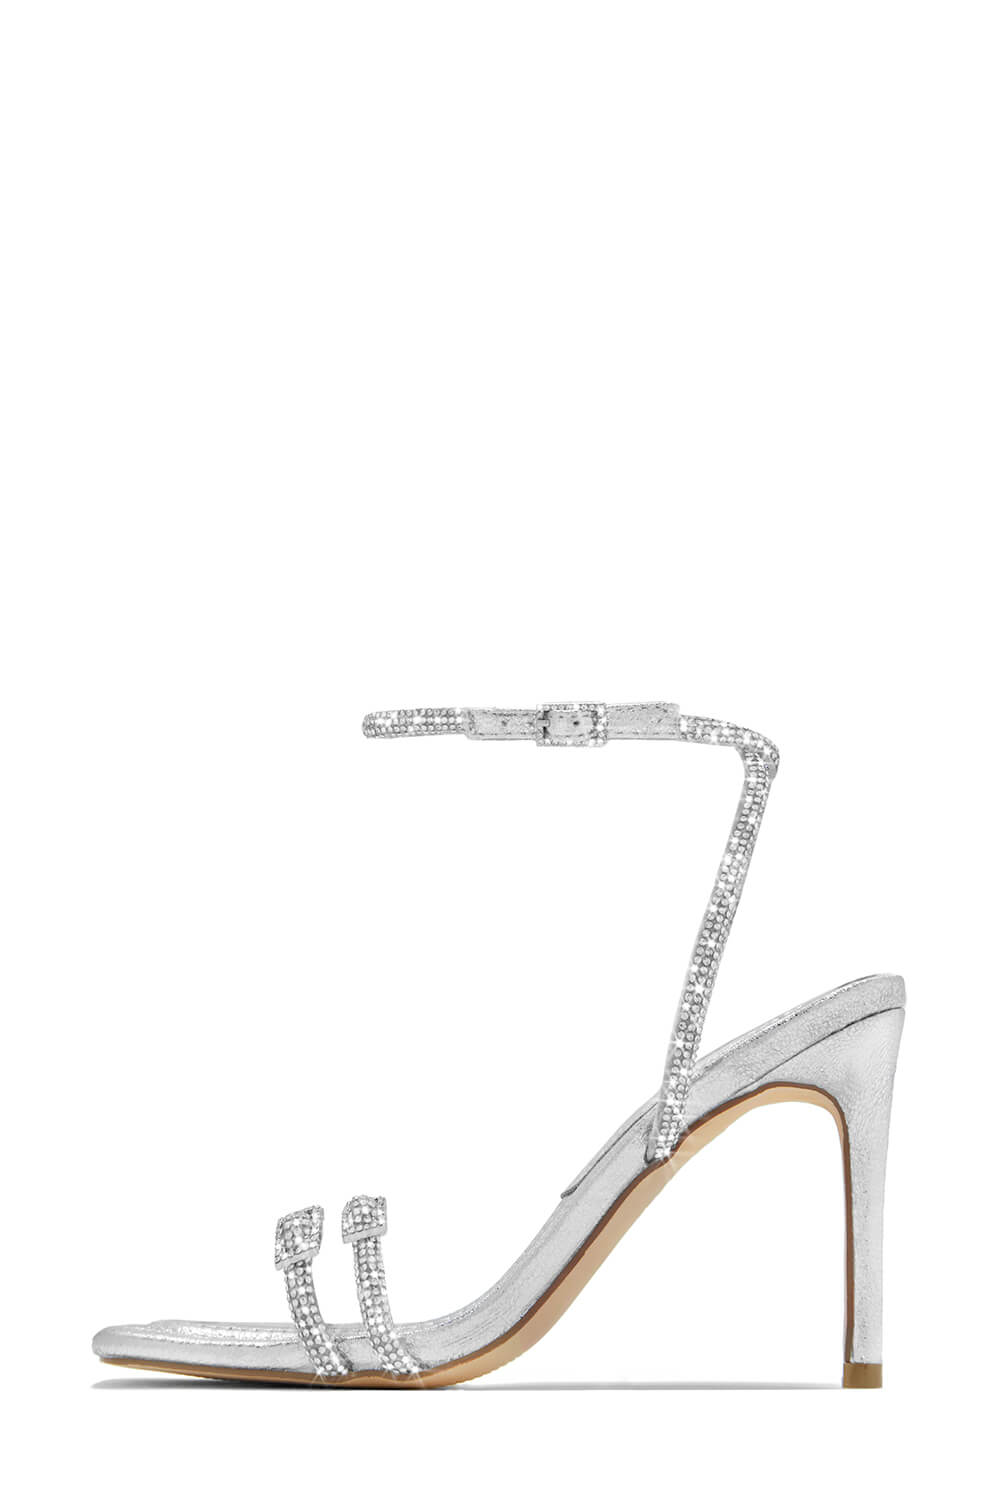 Double Diamante Embellished Strap Open Square Toe Heel - Silver